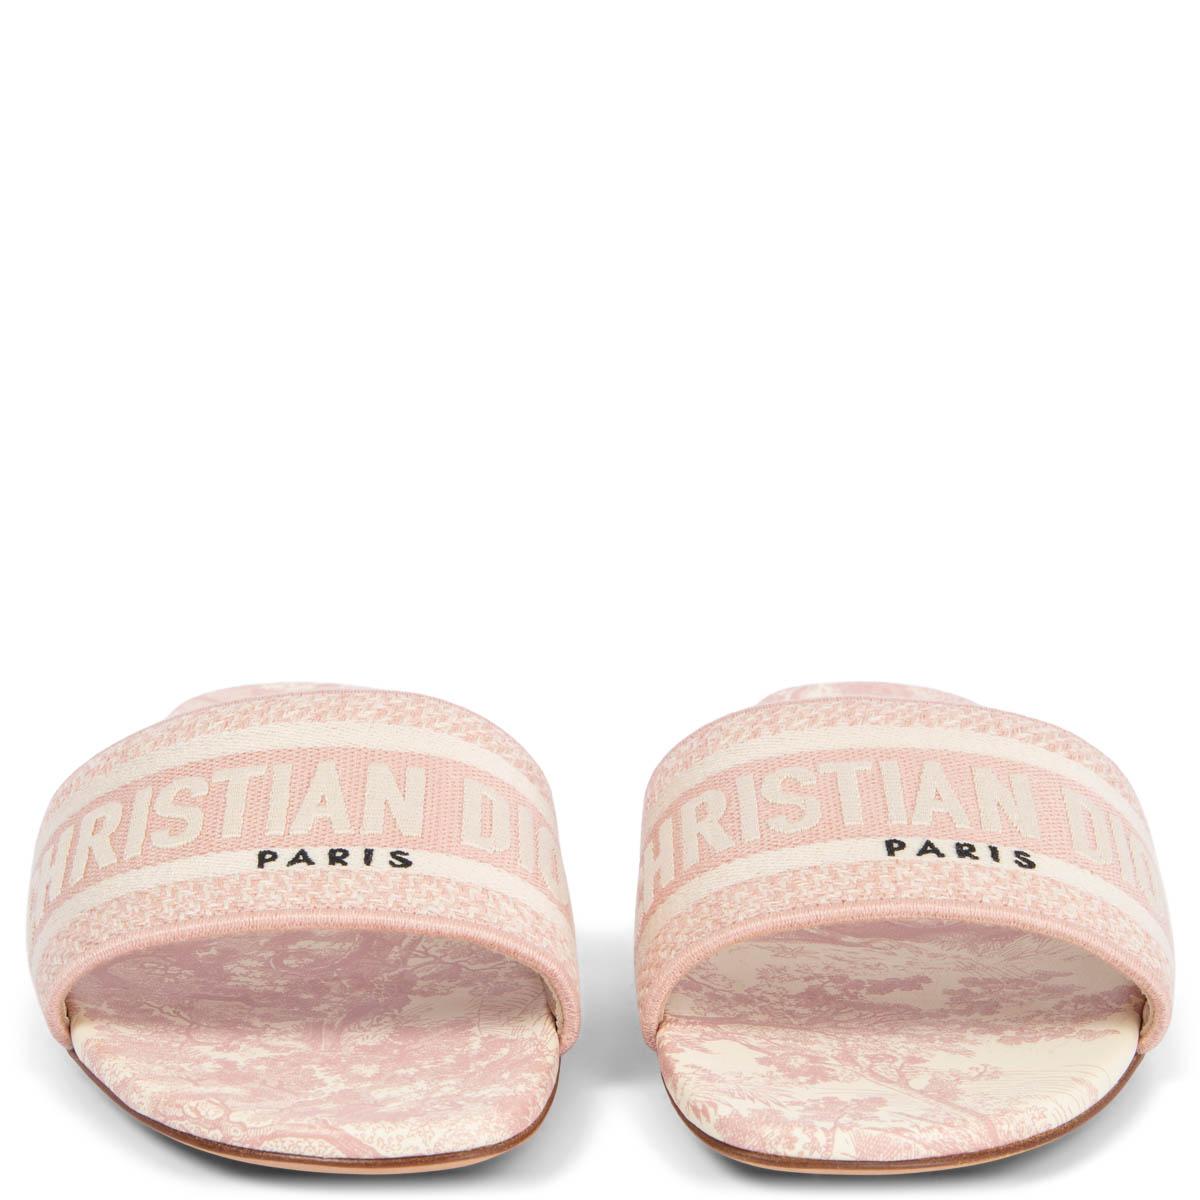 100% authentic Dior DWAY Toile De Jouy embroidered slides in dusty rose and off-white canvas with printed calfskin insole. Brand new. Come with dust bag. 

Measurements
Imprinted Size	38
Shoe Size	38
Inside Sole	25cm (9.8in)
Width	8cm (3.1in)

All